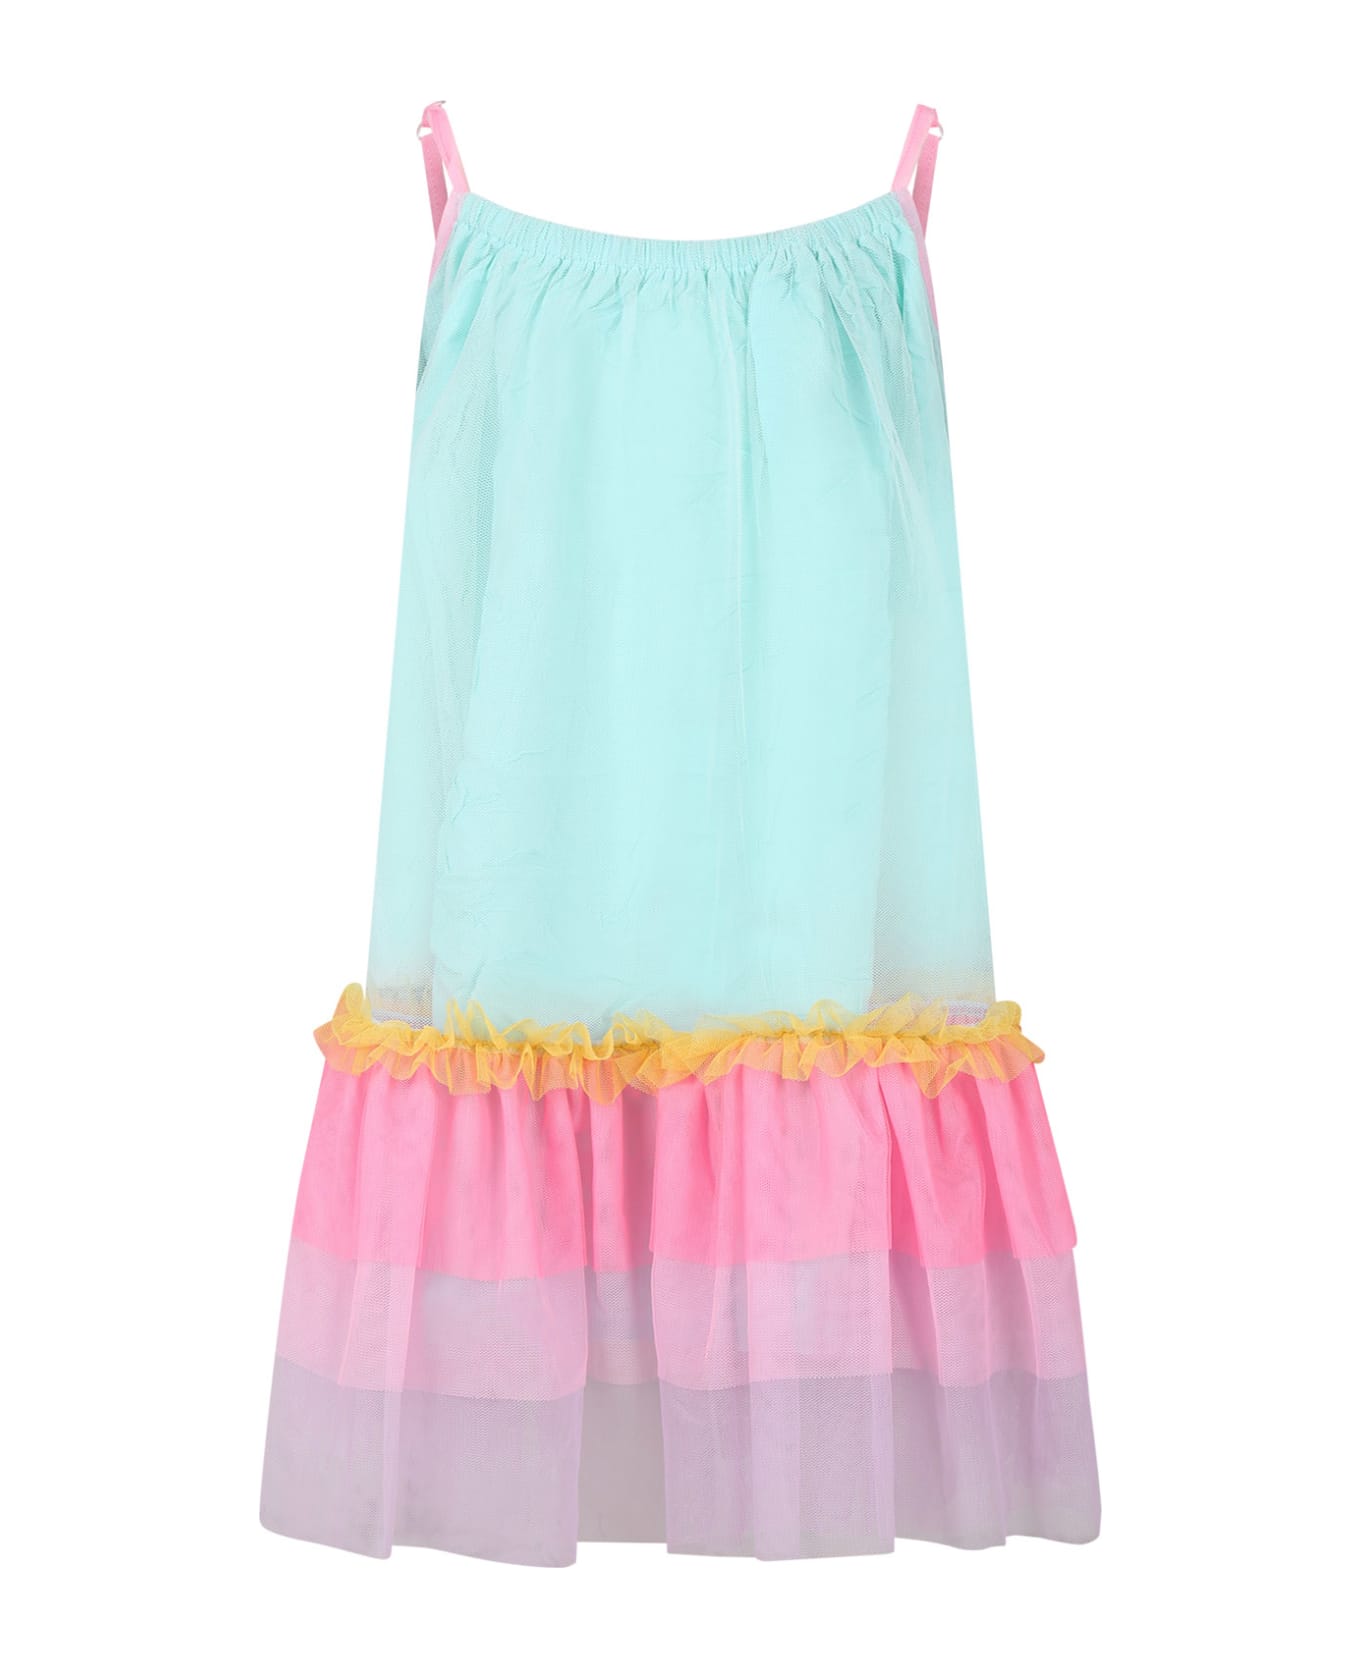 Billieblush Multicolor Dress For Girl With Ruffles And Flounces - Multicolor